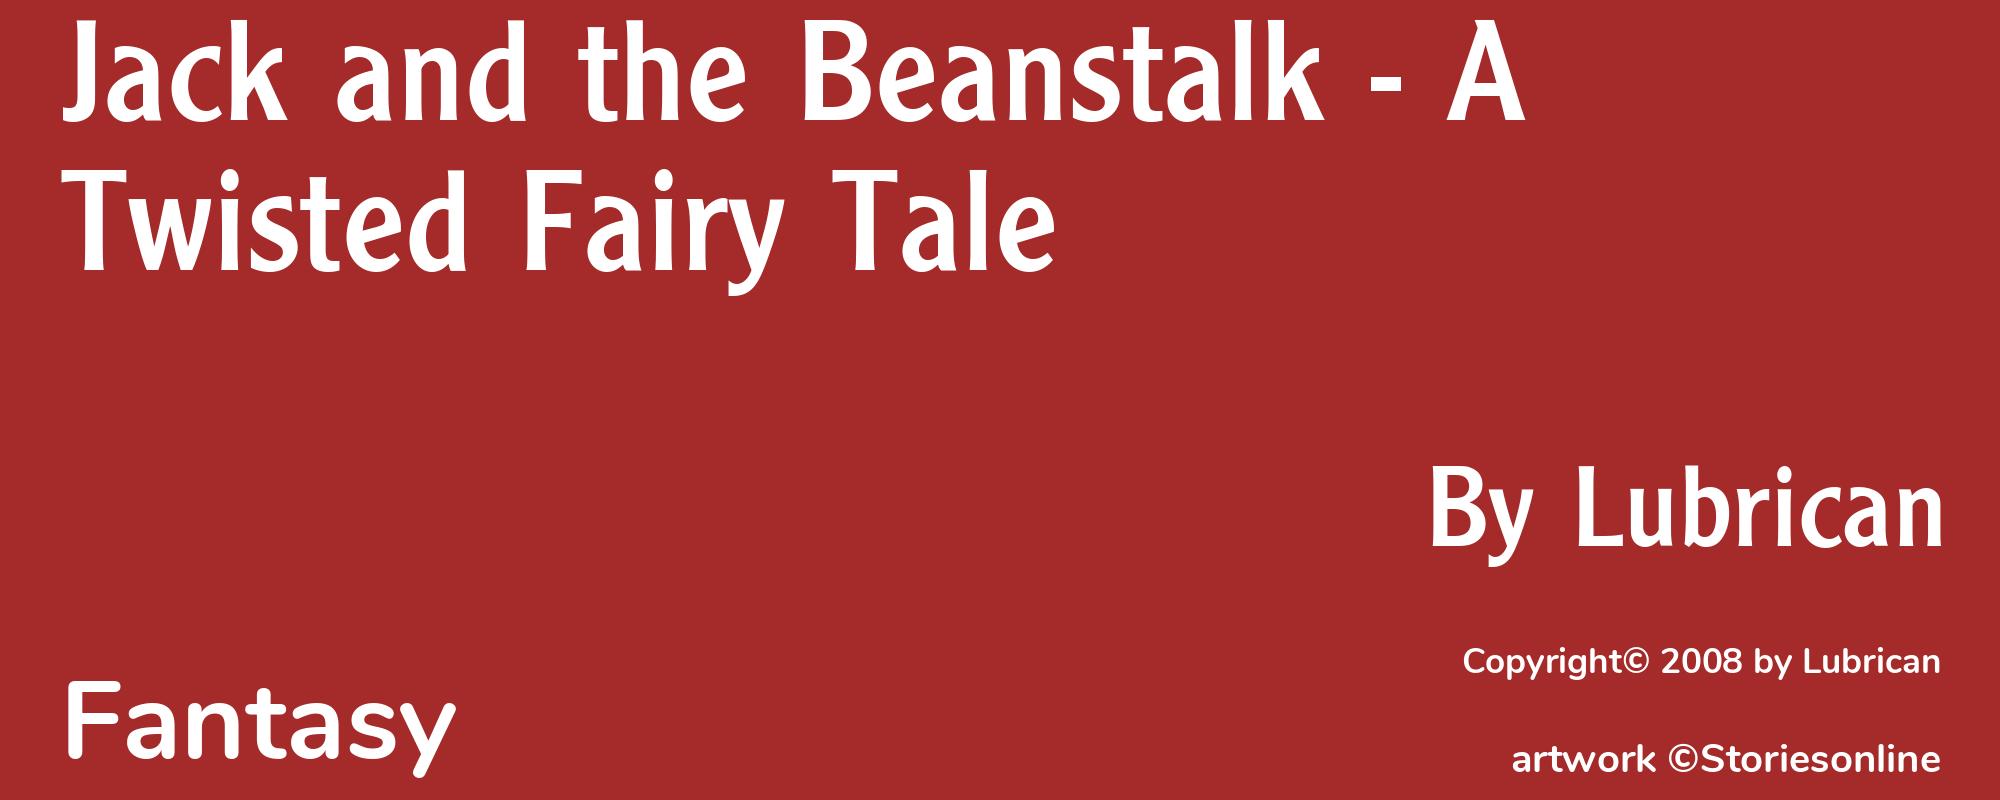 Jack and the Beanstalk - A Twisted Fairy Tale - Cover